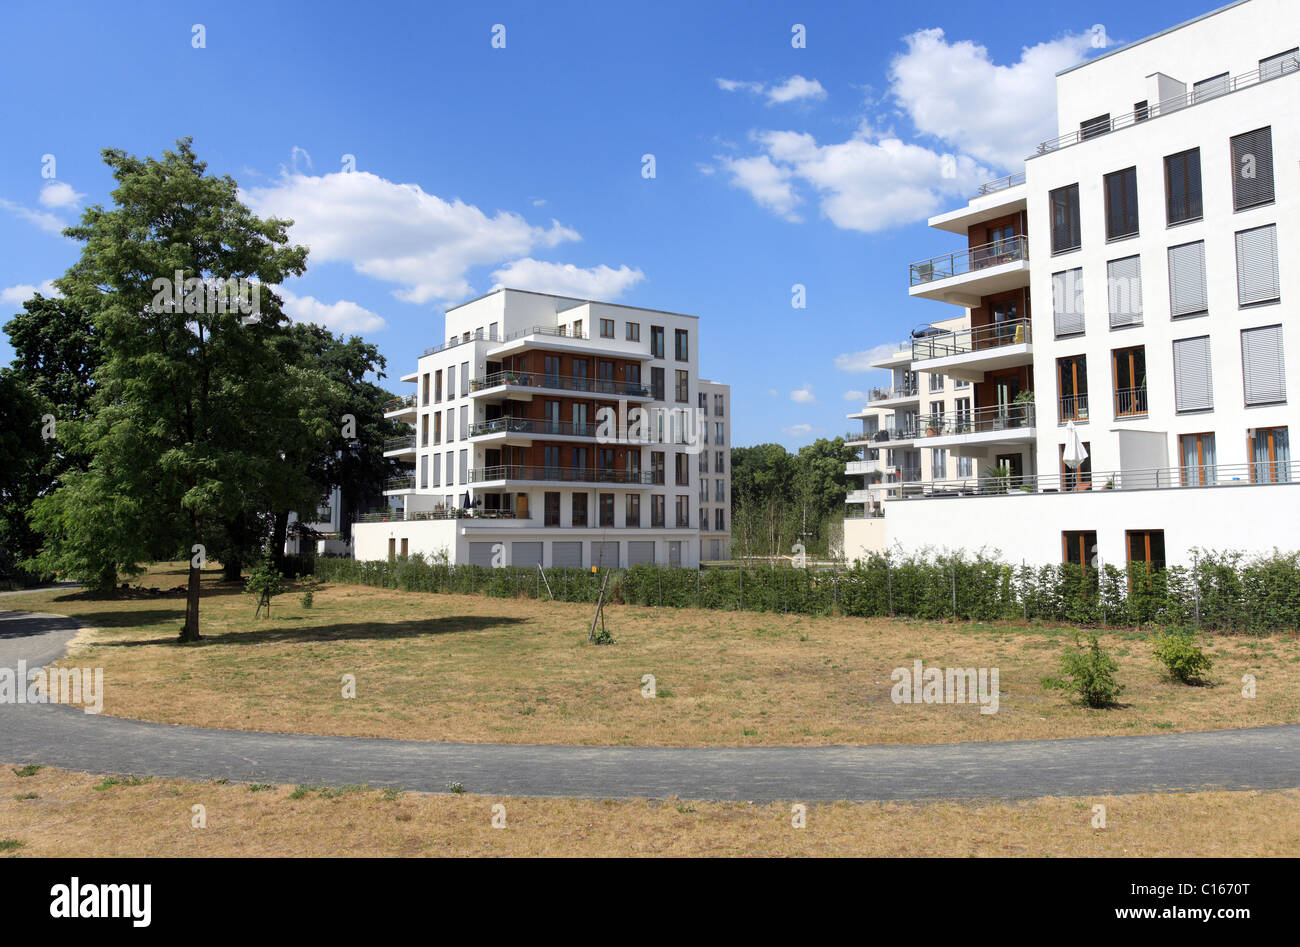 Residential buildings, town houses, Wasserstadt Stralau, Expo 2000, Berlin, Germany, Europe Stock Photo